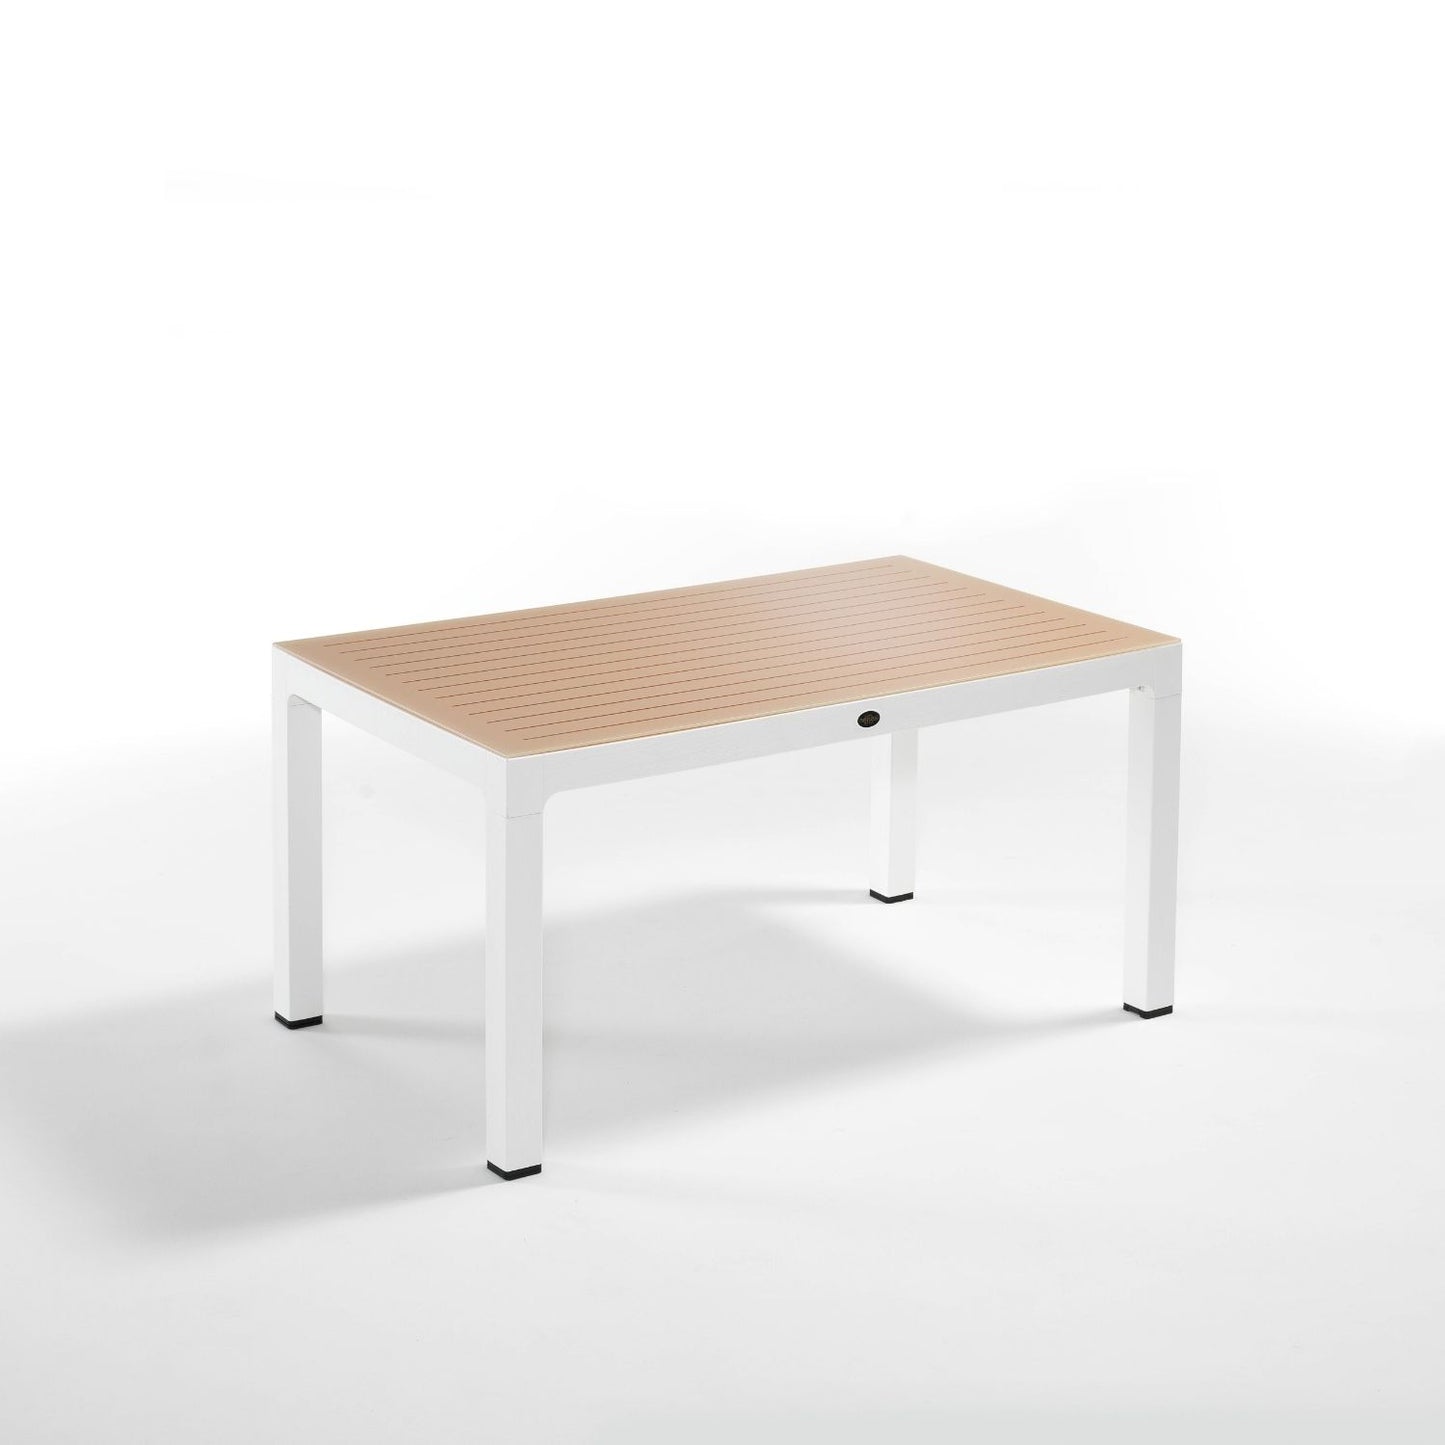 Novussi Wood Table 90x150 Lined Glass Table